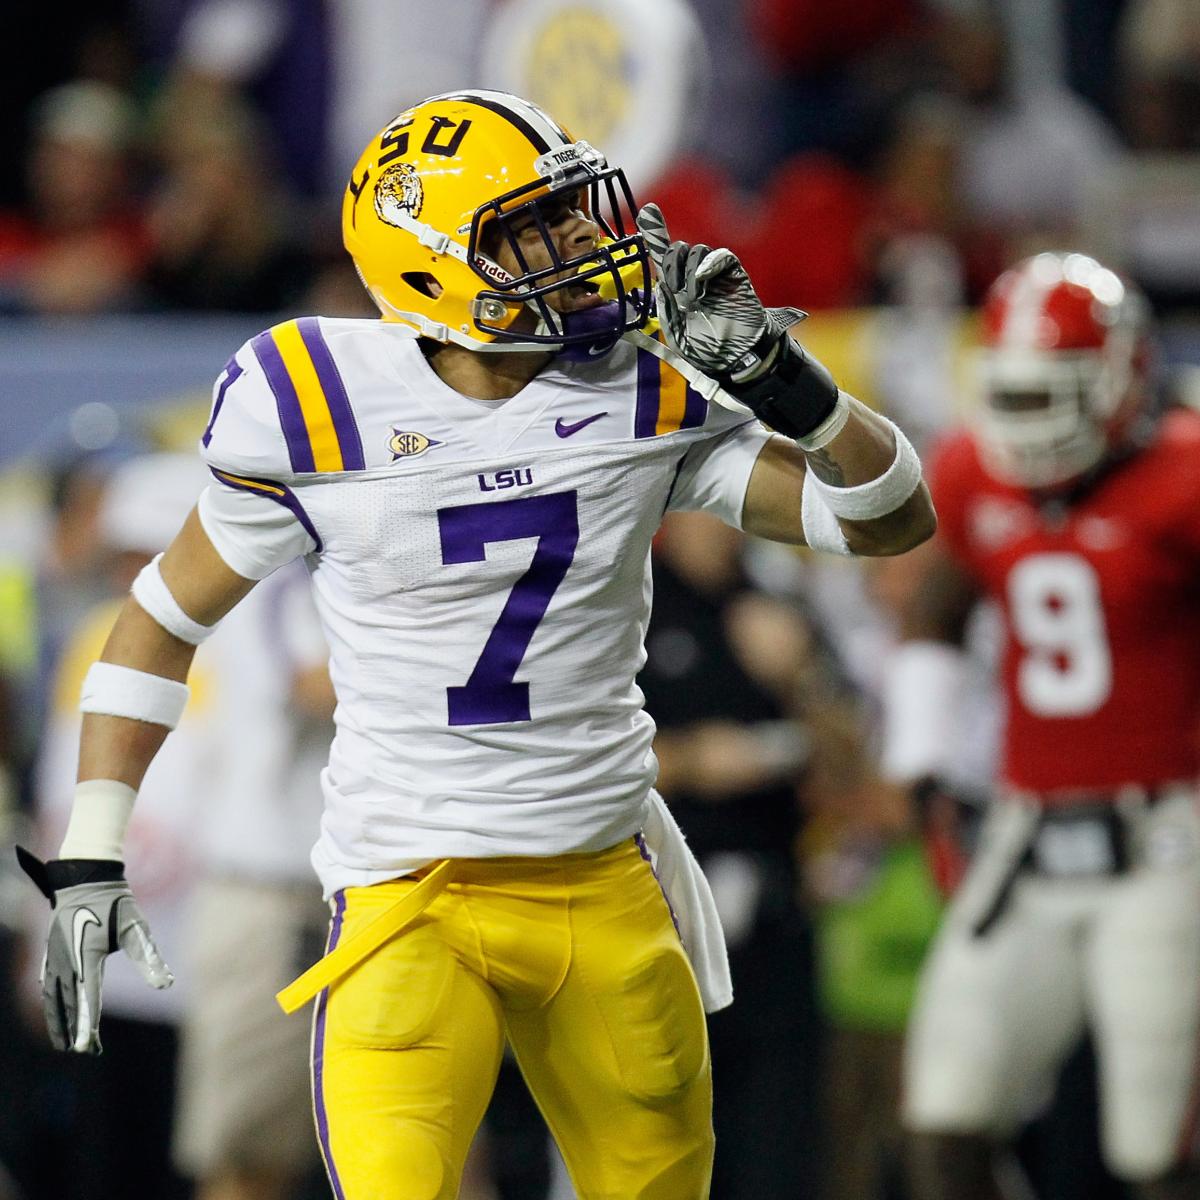 Tyrann Mathieu: 5 NFL Teams That Could Gamble on the Honey Badger in